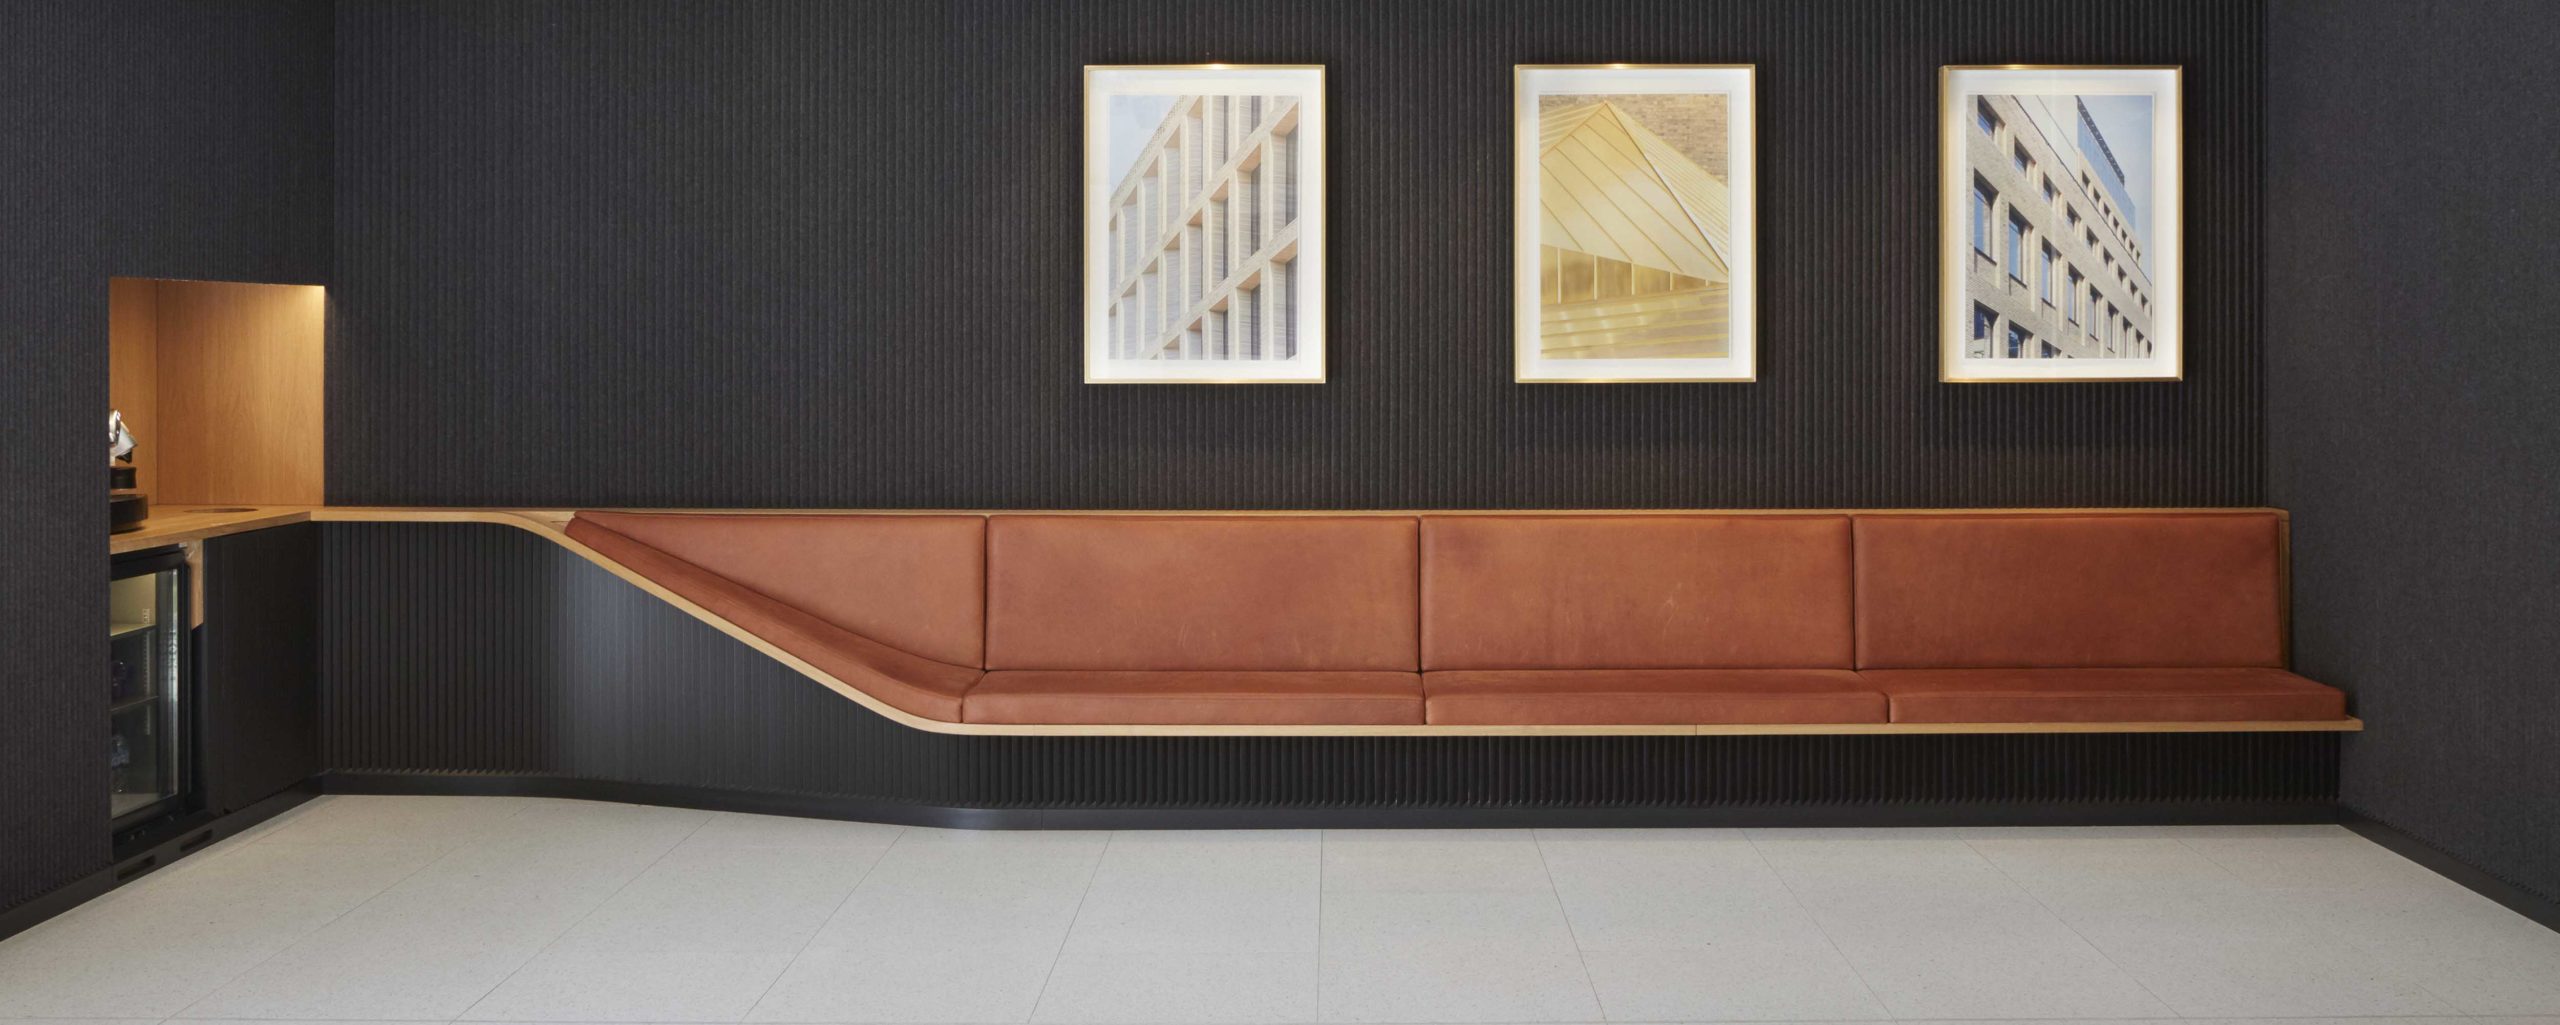 Bespoke reception seating for The Centro Building